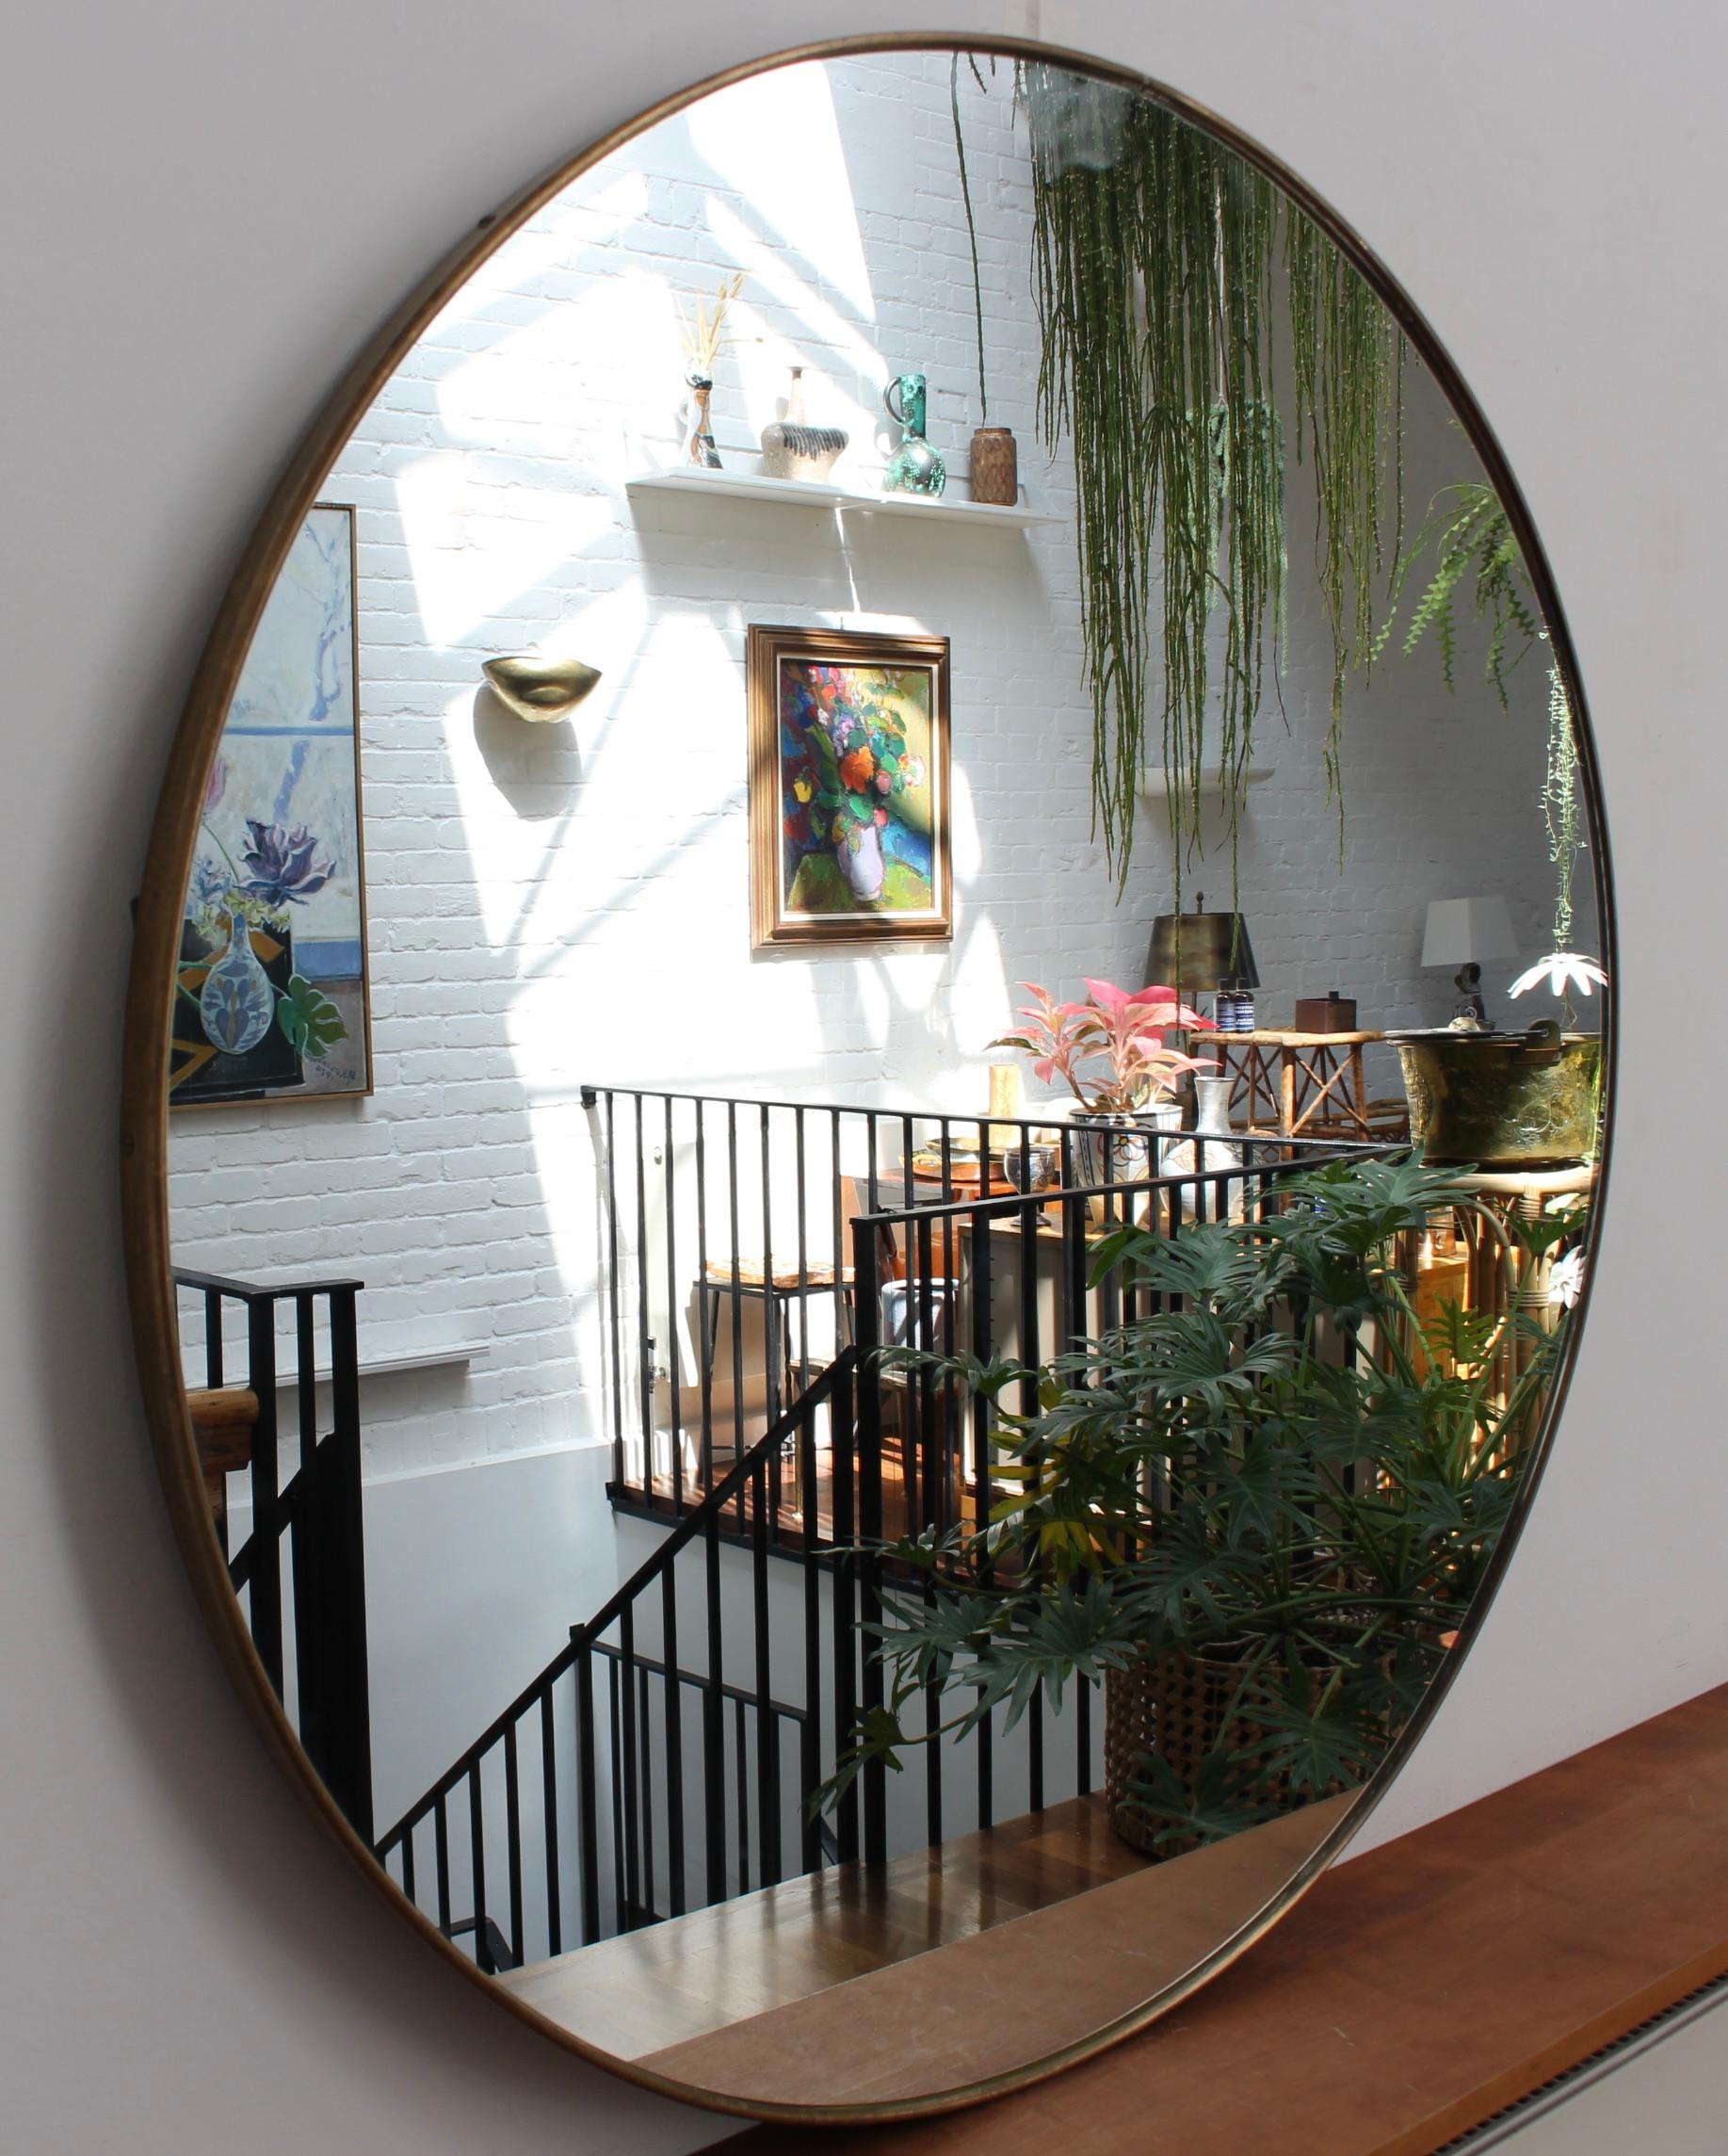 Mid-century Italian wall mirror with brass frame (circa 1960s). The mirror is a perfectly shaped circle in a Modern style. It is in good overall condition with just a light blemish on the glass. A beautiful, aged patina develops on the brass frame.